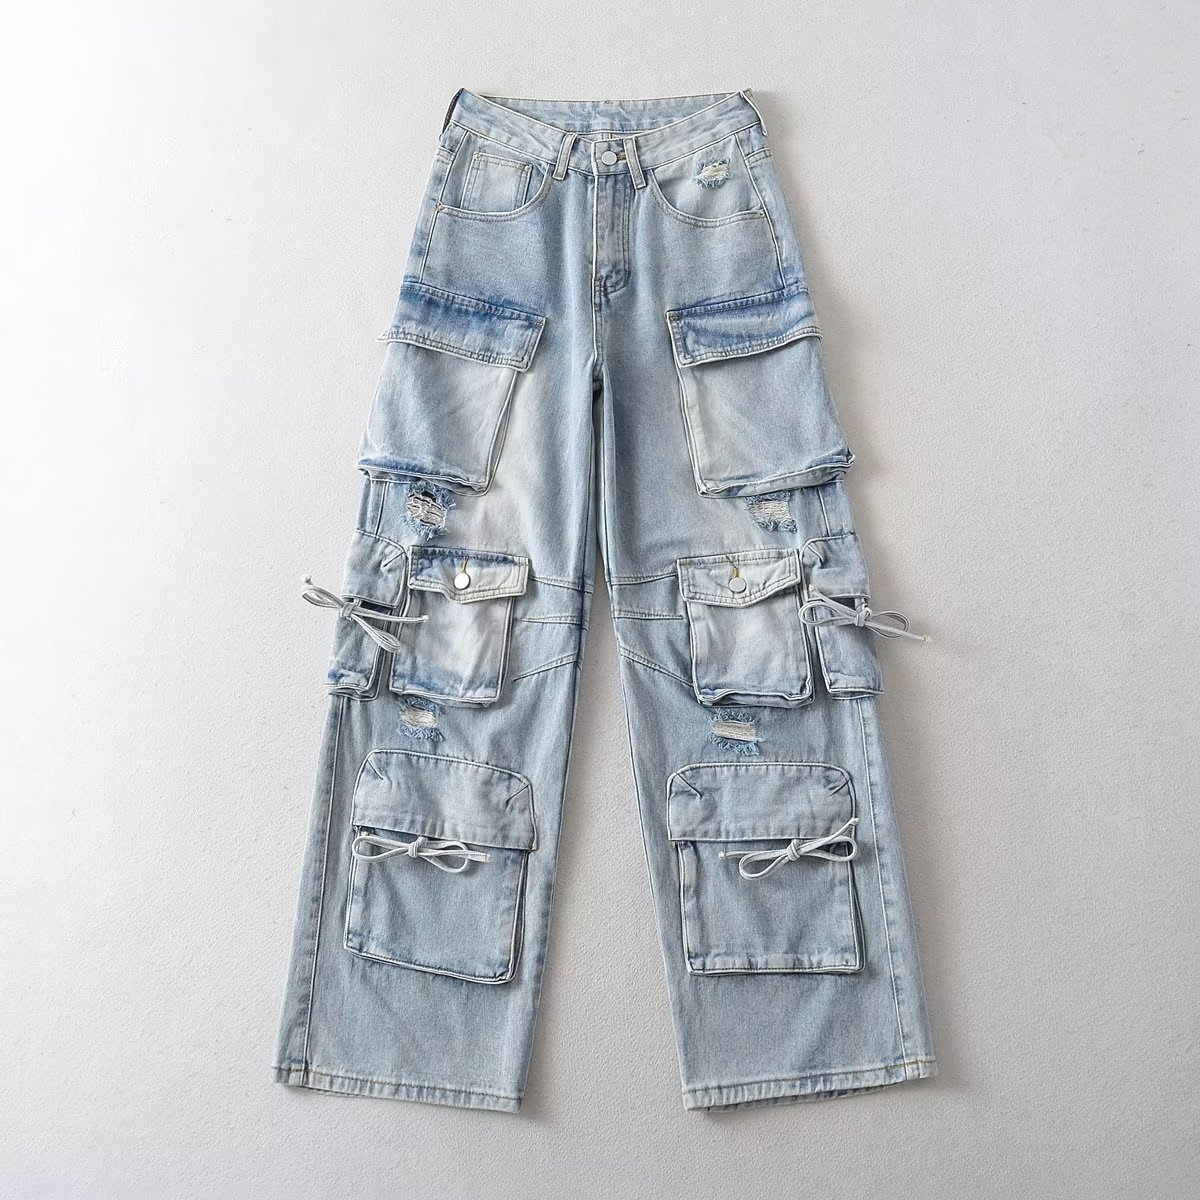 American Heavy Industry Multi-Pocket Jeans for Women 2023 Autumn New Hot Girl Washed Overalls Loose Straight Trousers